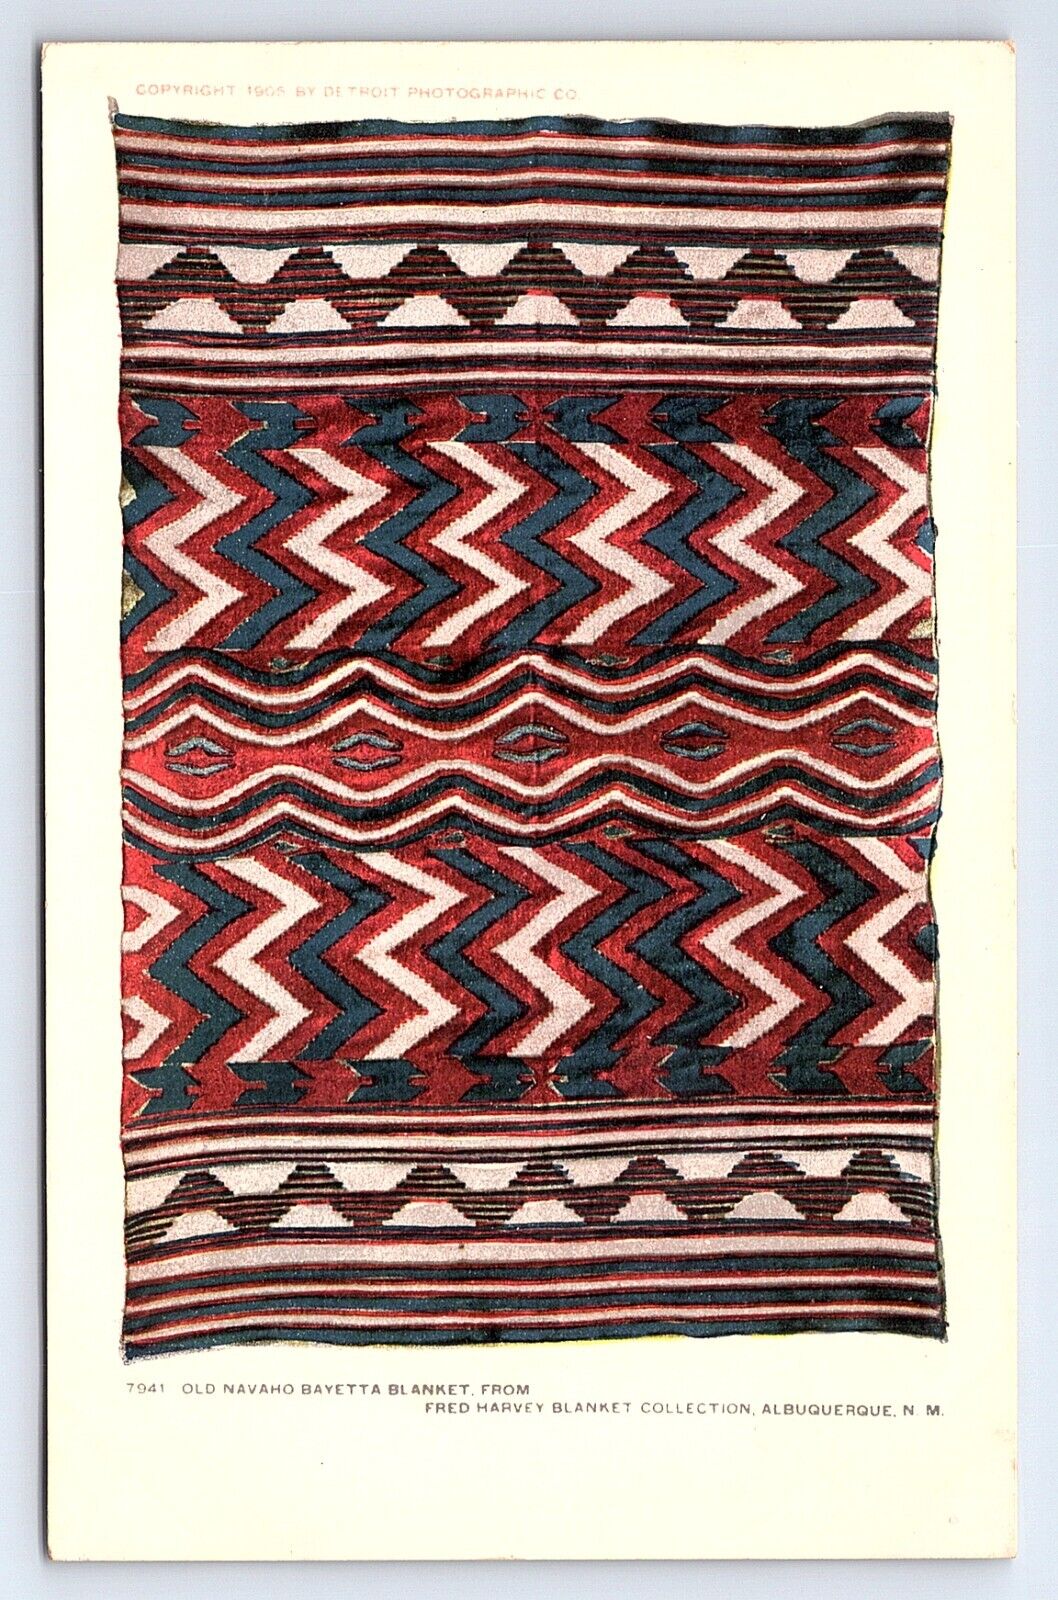 Postcard Old Navajo Bayetta Blanket From Fred Harvey Collection Albuquerque NM